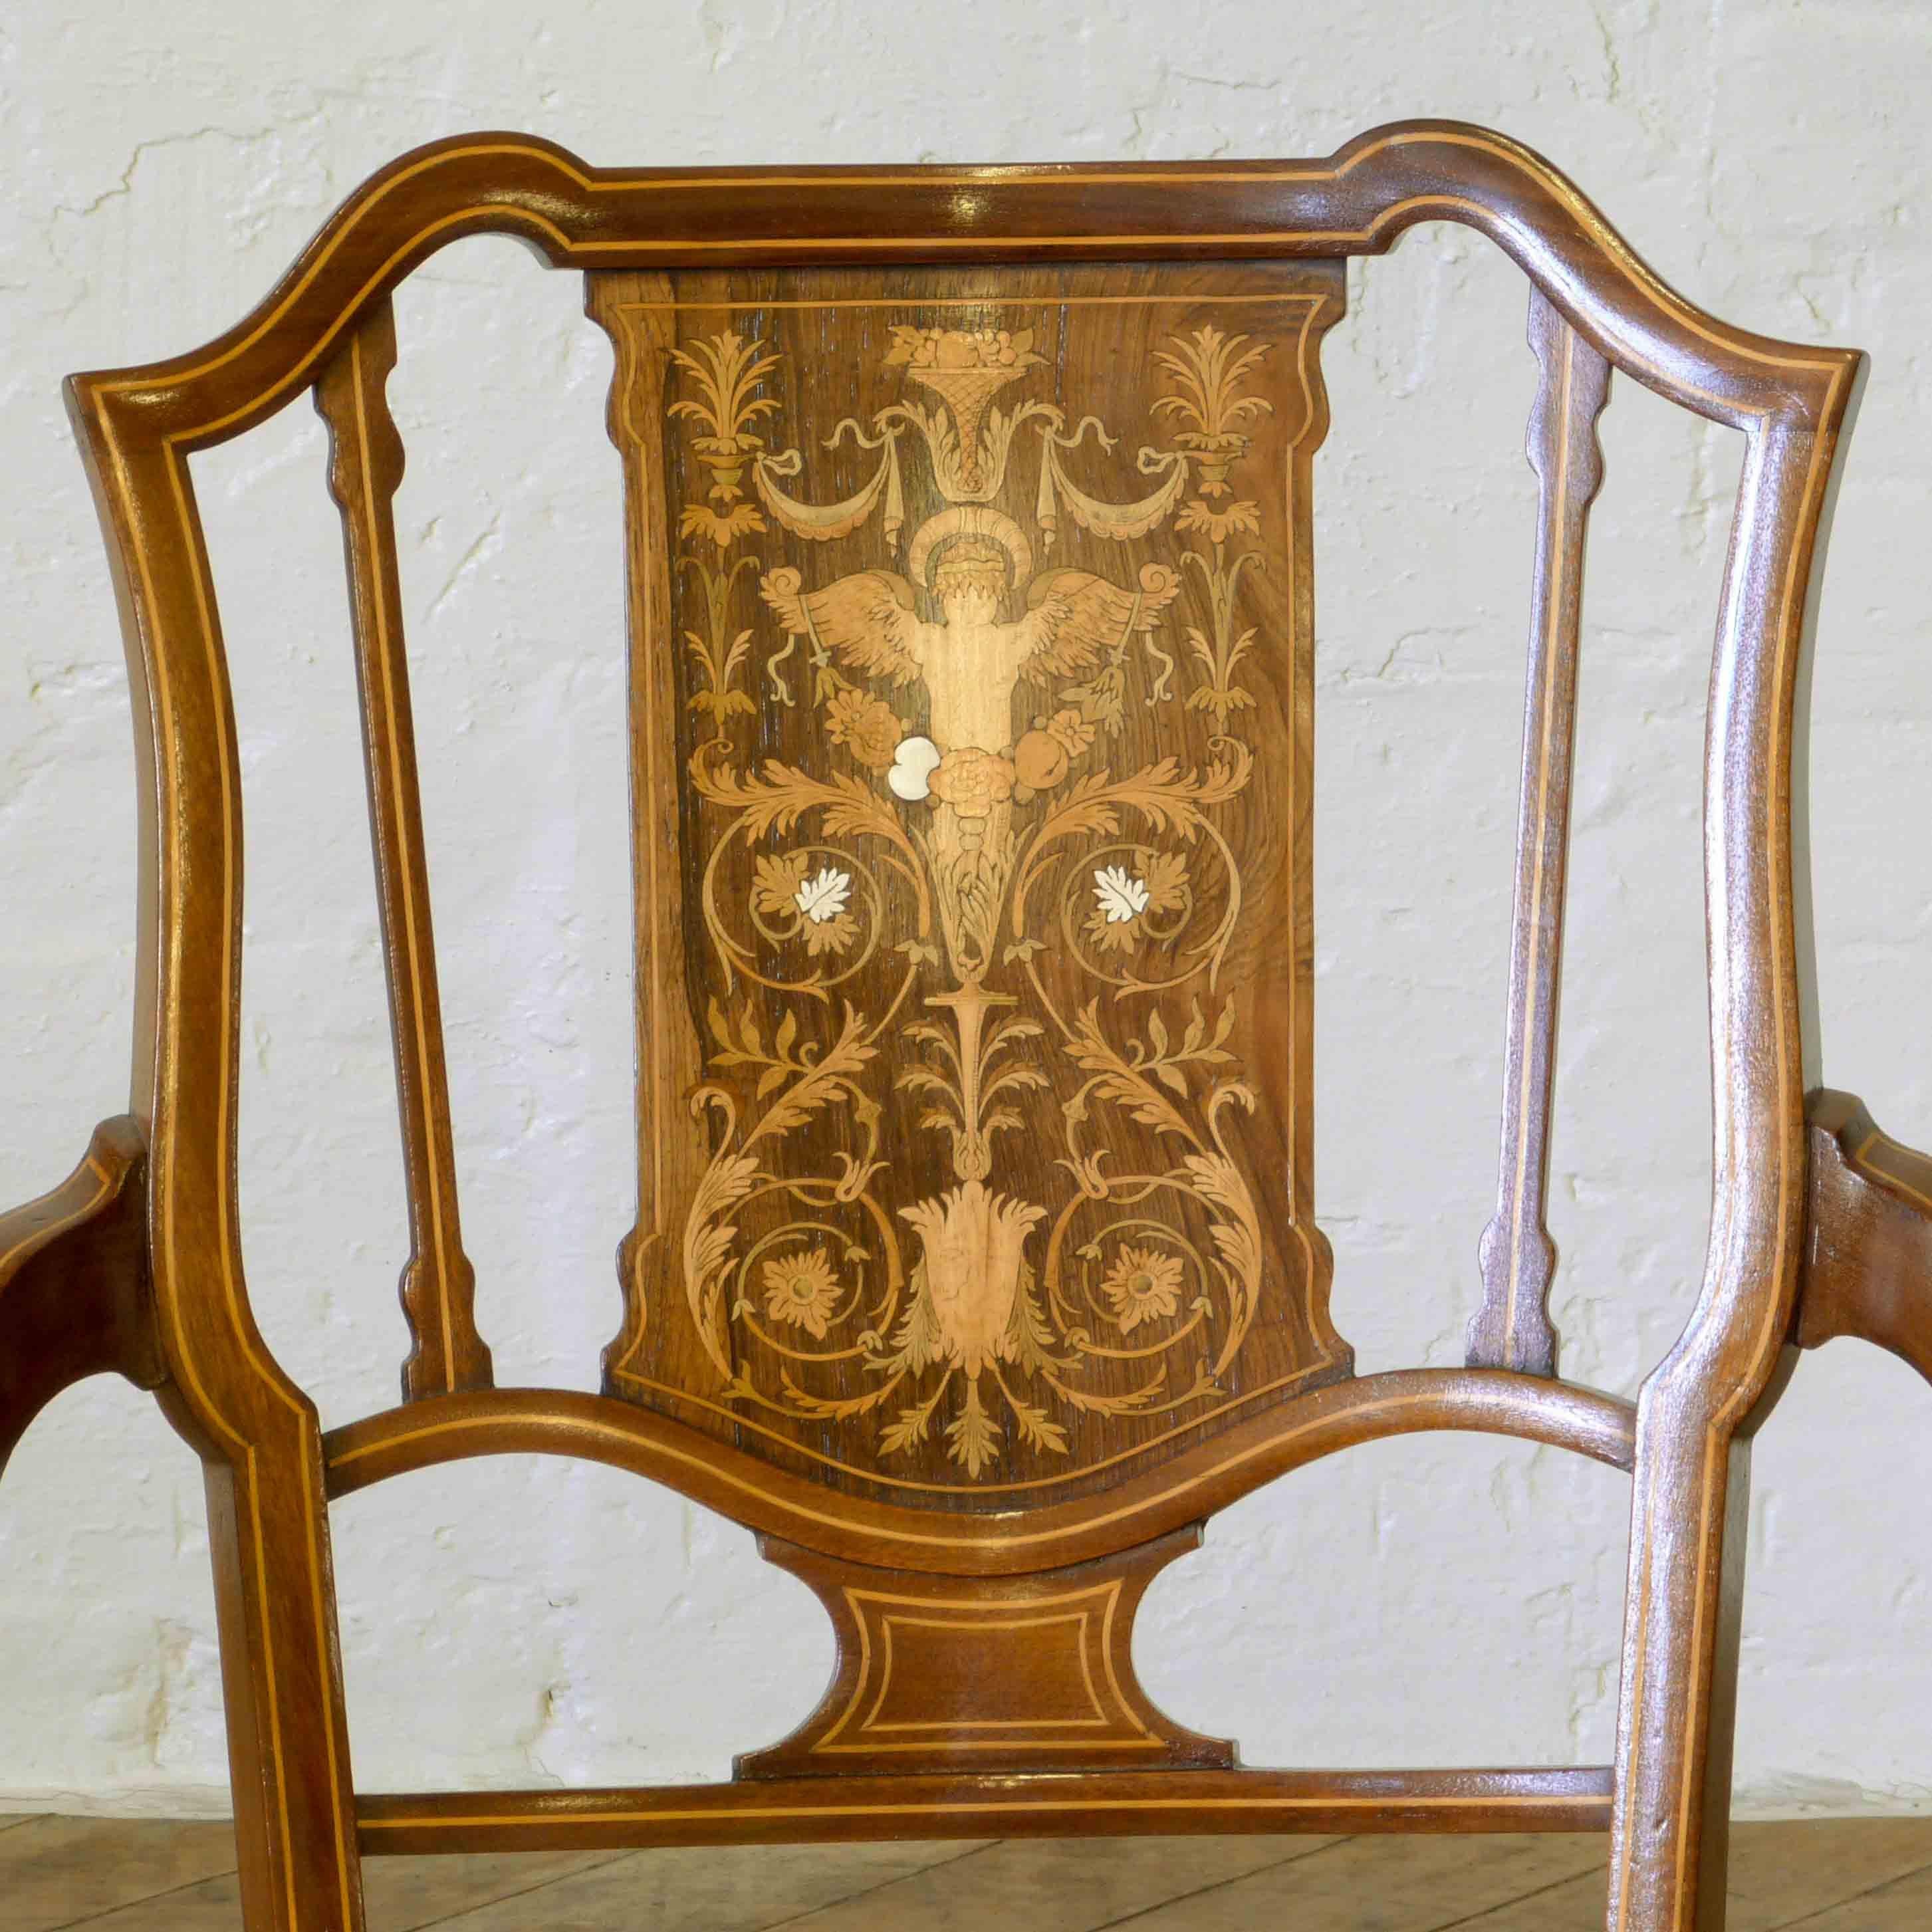 An exquisite mahogany armchair, lined throughout with boxwood stringing and highlighted with a profusely inlaid panel to the back. Repolished and newly upholstered in a gold damask material, this chair is back to it's best and ready to admire and